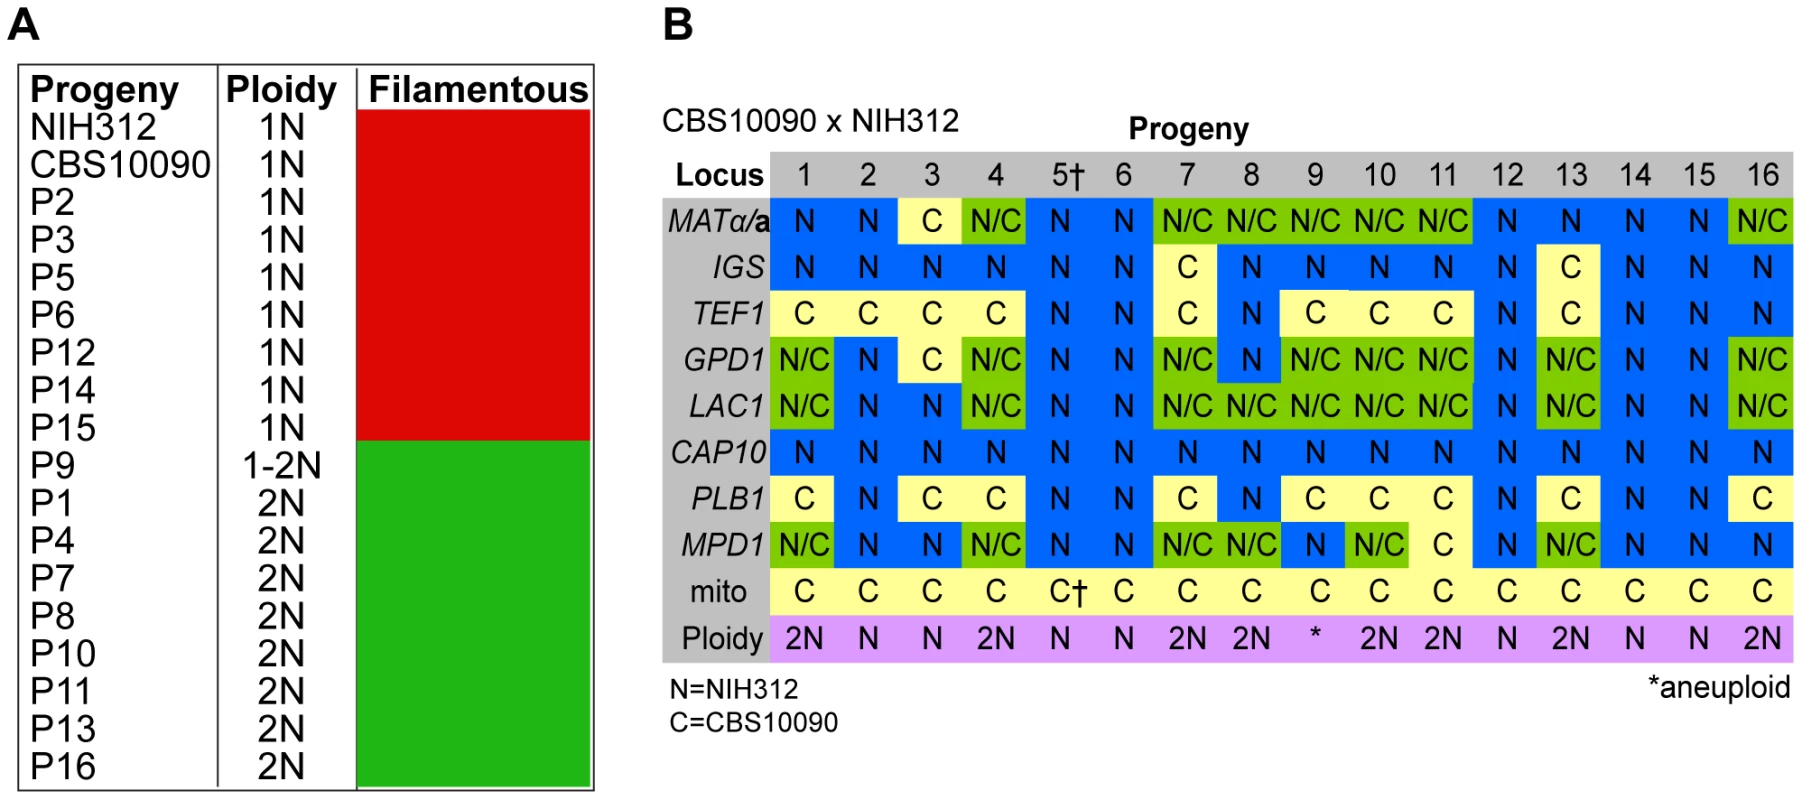 Molecular characterisation of progeny from outgroup cross CBS10090 x NIH312.